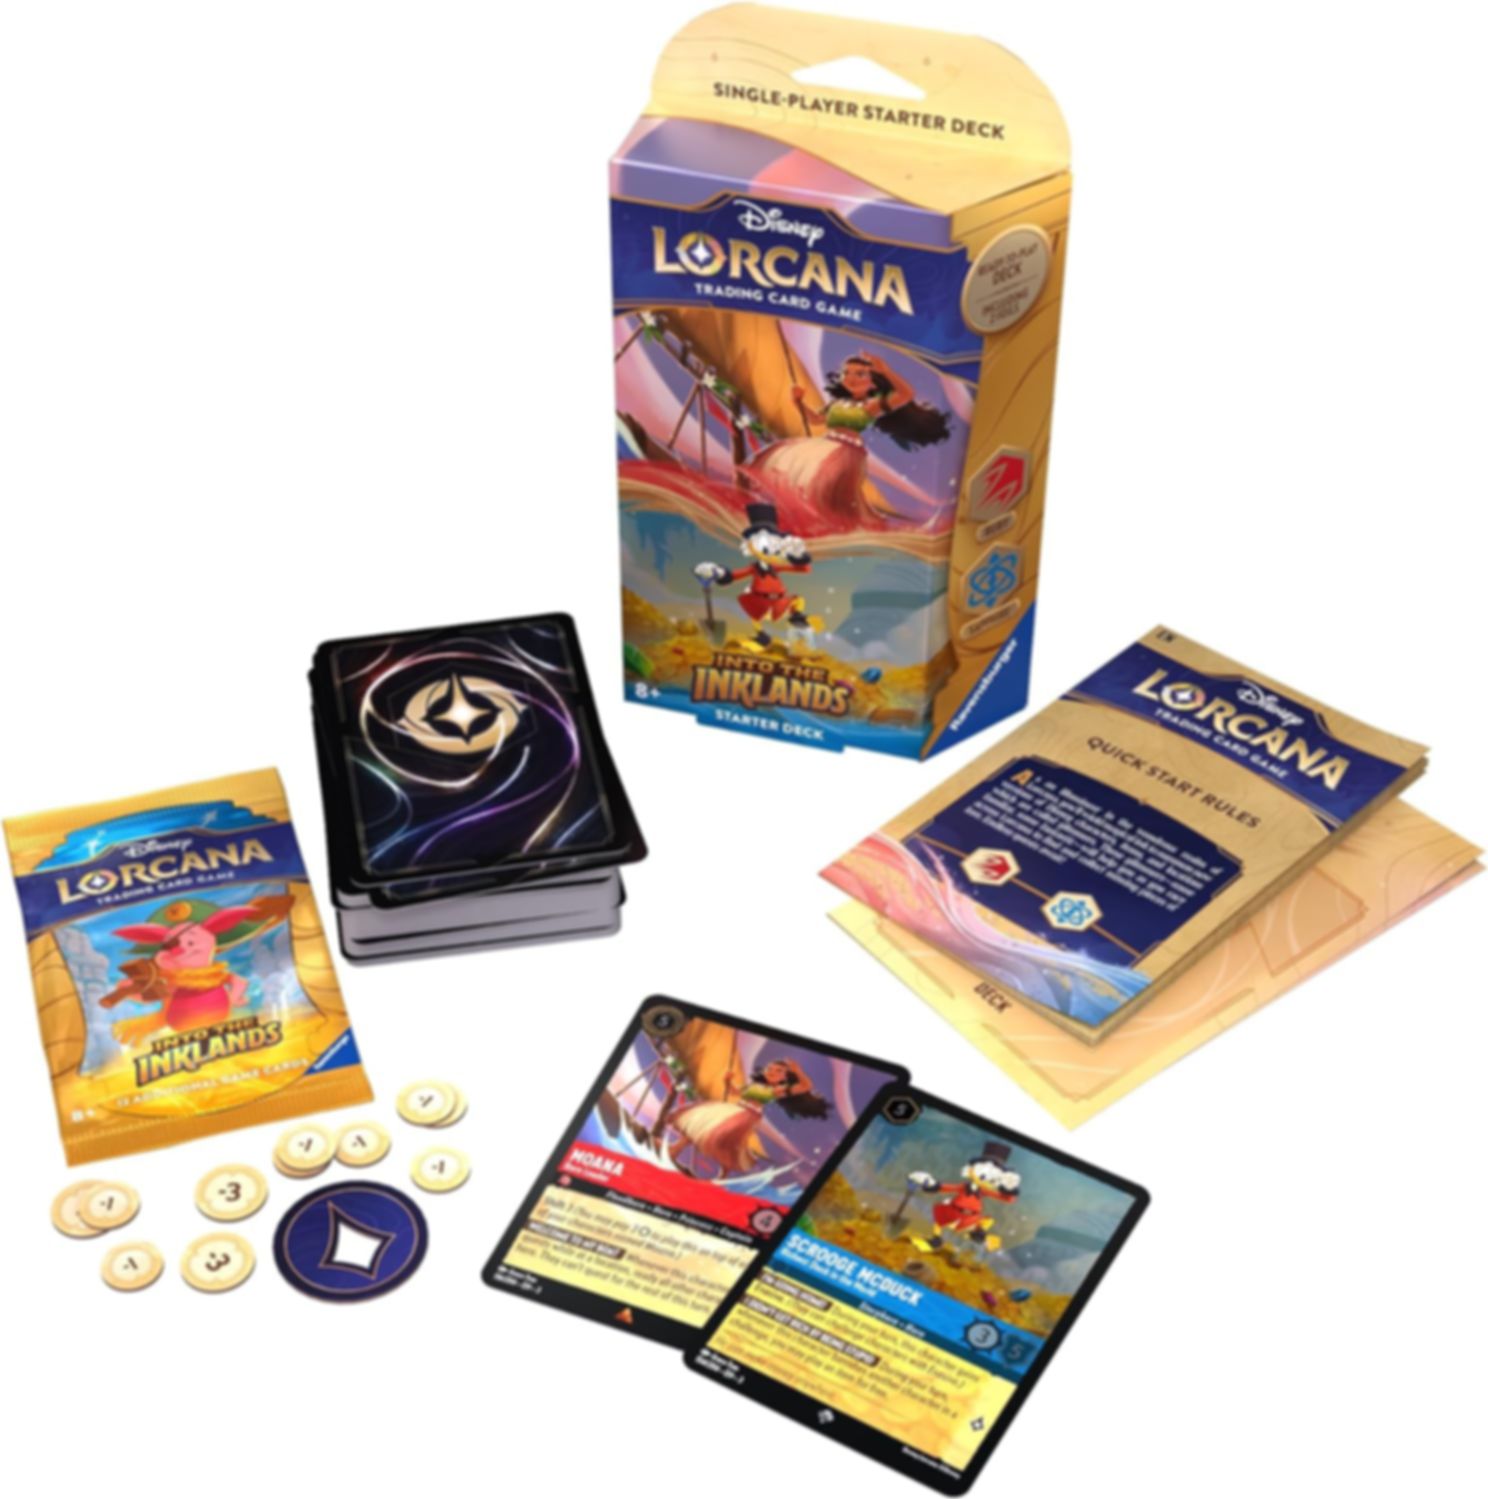 Disney Lorcana: Into the Inklands Starter Deck - Moana & Scrooge McDuck components